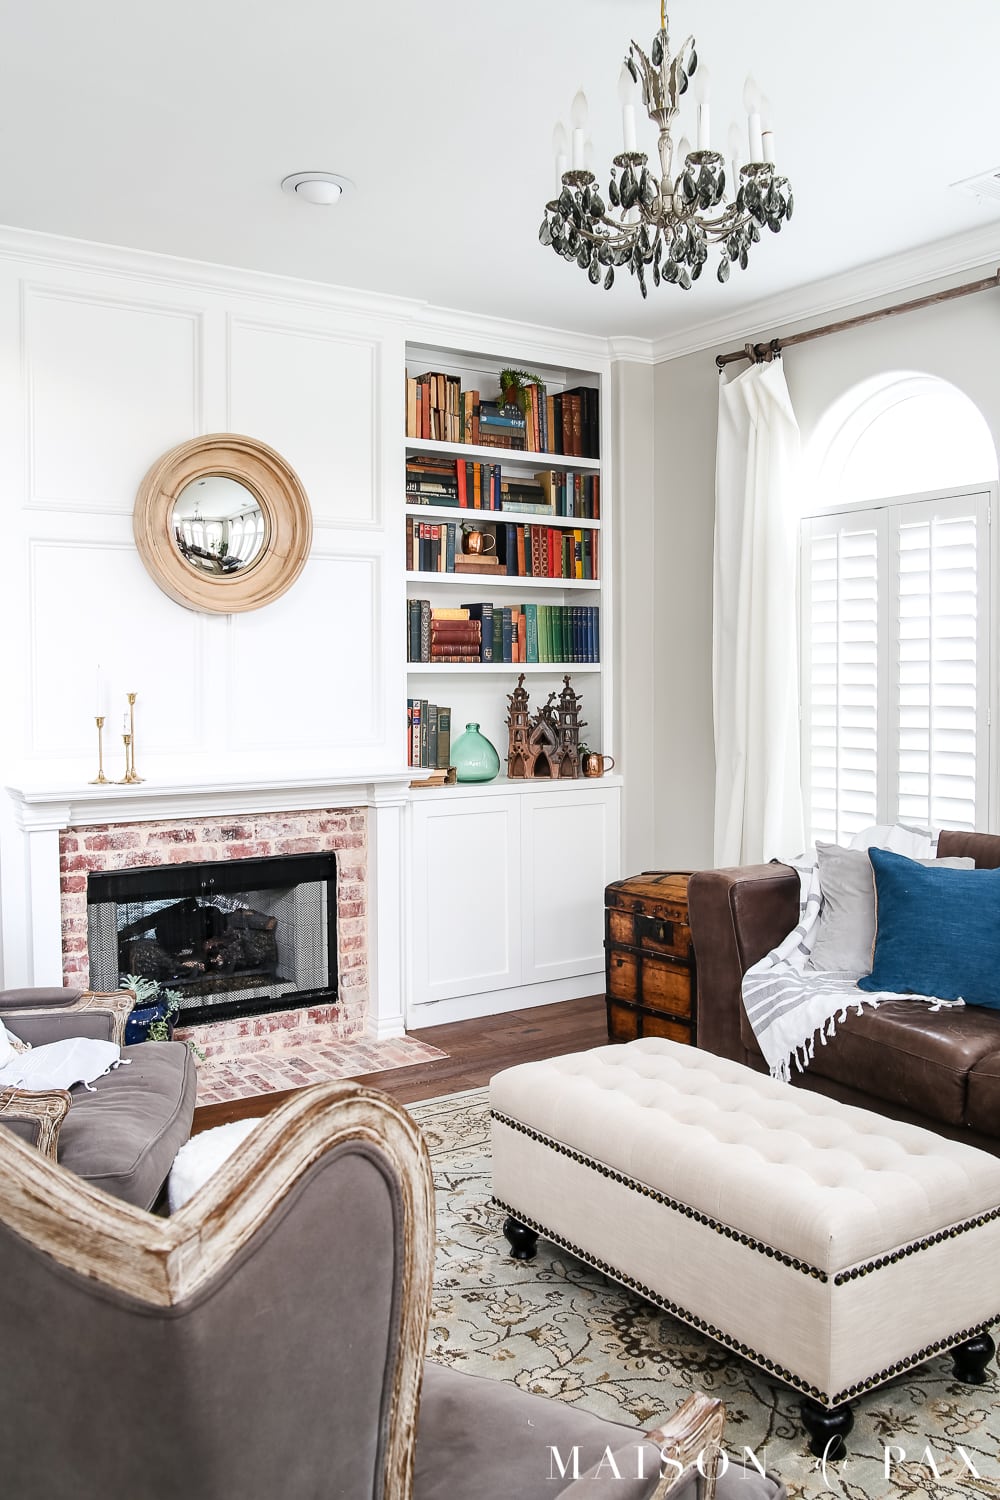 Neutral living room with colorful antique books: Wondering how to seasonally decorate your living spaces without going to too much trouble?  Get my best tips for transitioning from winter whites to neutrals, blues, and greens for a spring living room. #springdecor #springdecorating #springlivingroom #antiquebooks #howtodecorate #seasonaldecor #seasonaldecorating